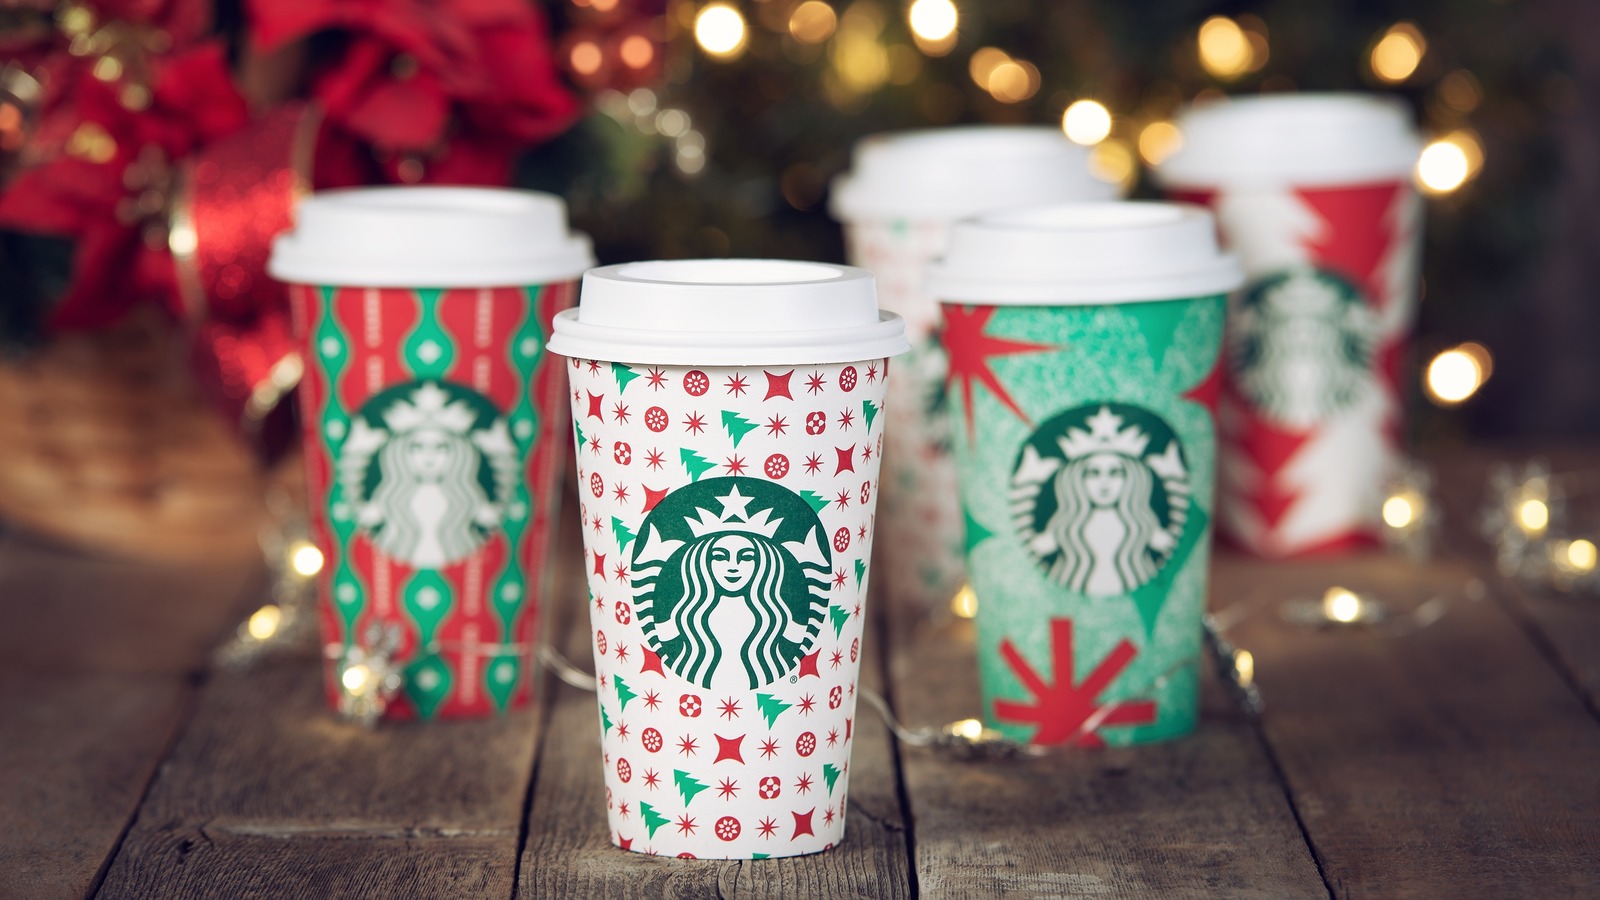 Photos from A Look at How Starbucks Holiday Cups Have Changed Over the Years